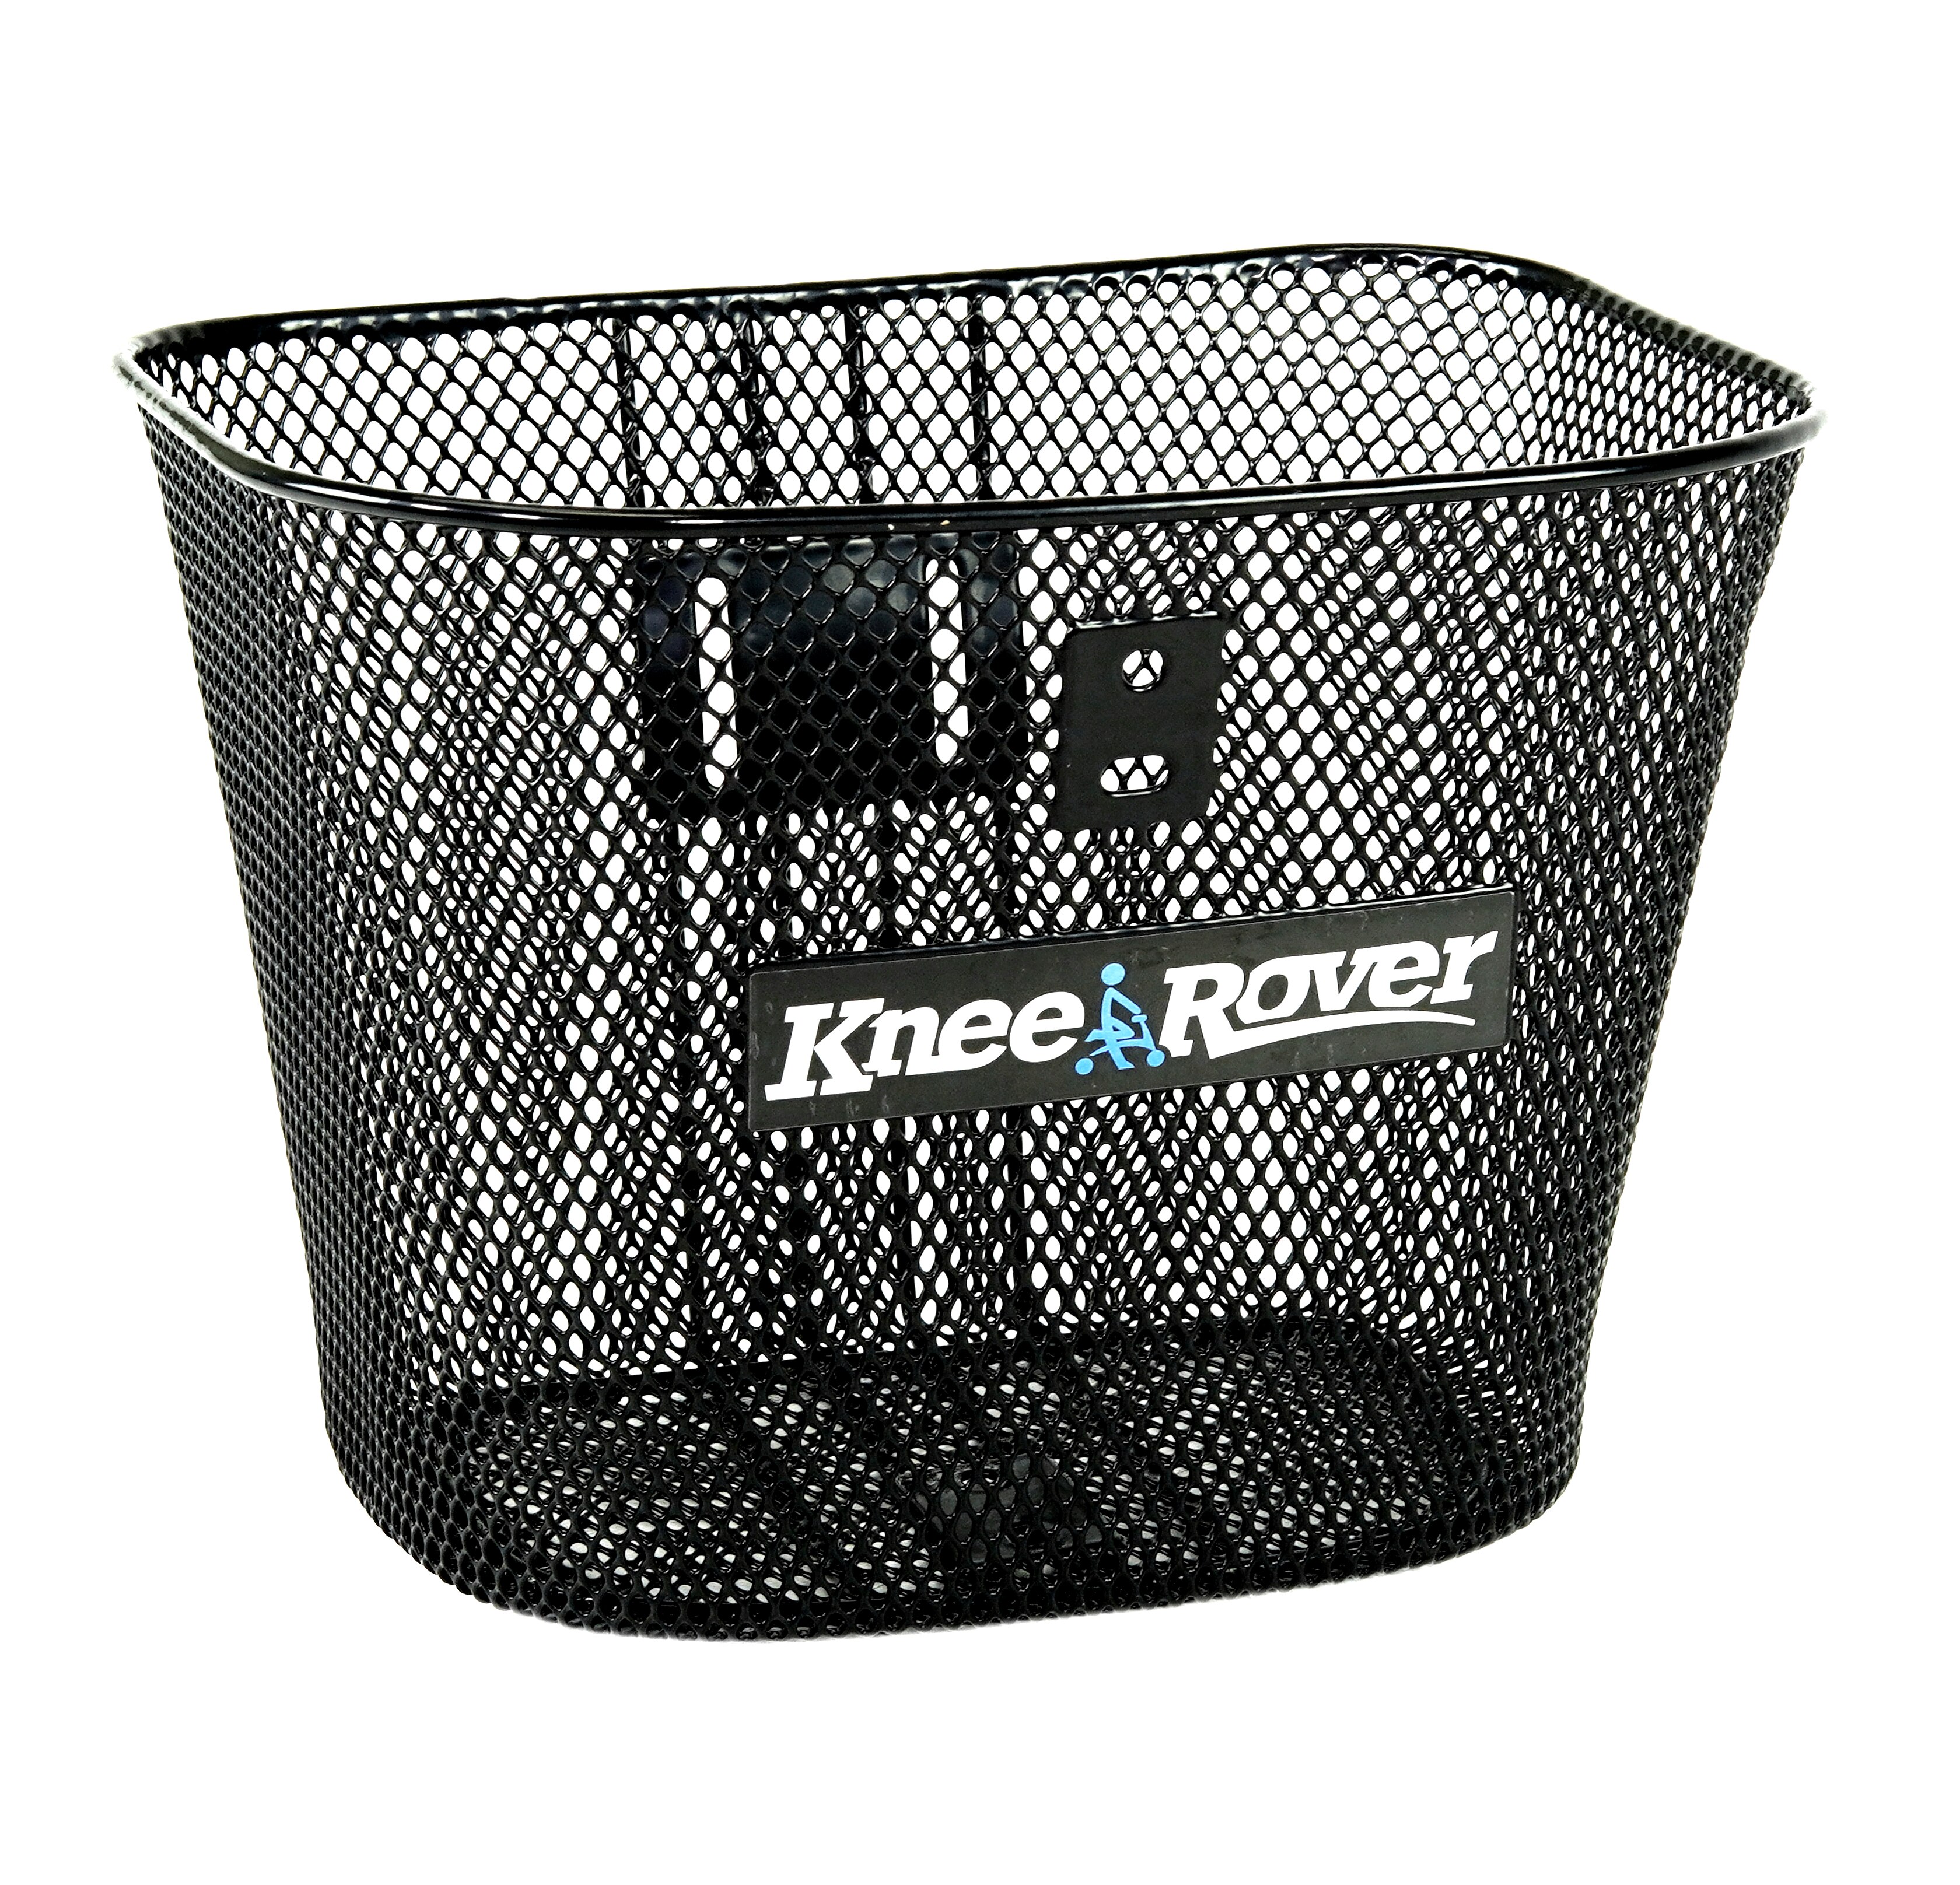 KneeRover Storage Basket - Replacement Part with Quick Release